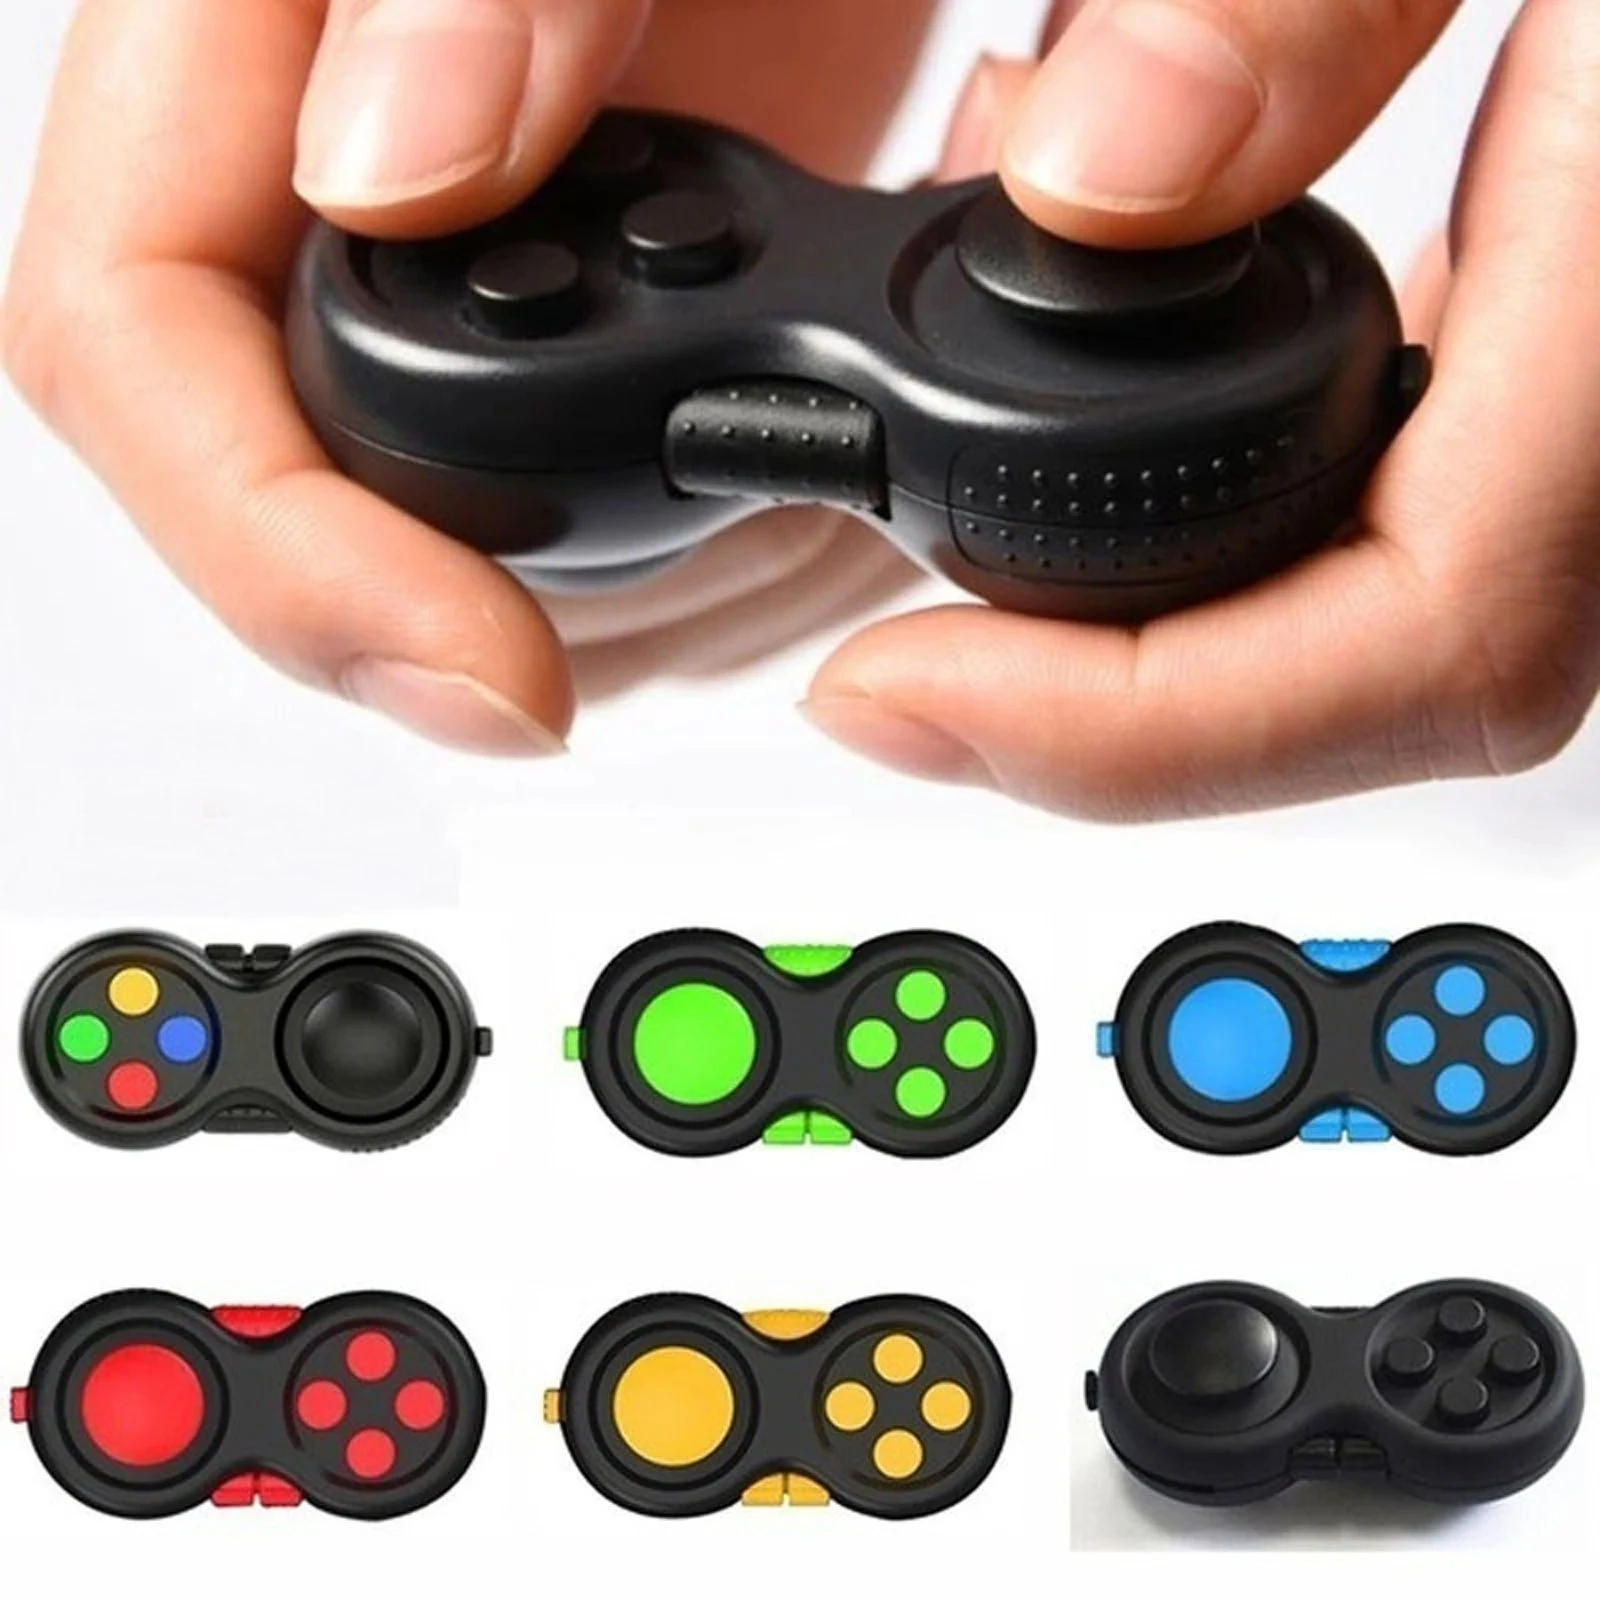 

Anxiety Stress Relief Attention Decompression Focus Fidget Gaming Dice Toys For Kids Adult Gifts Stress Reliever Fidget Toys